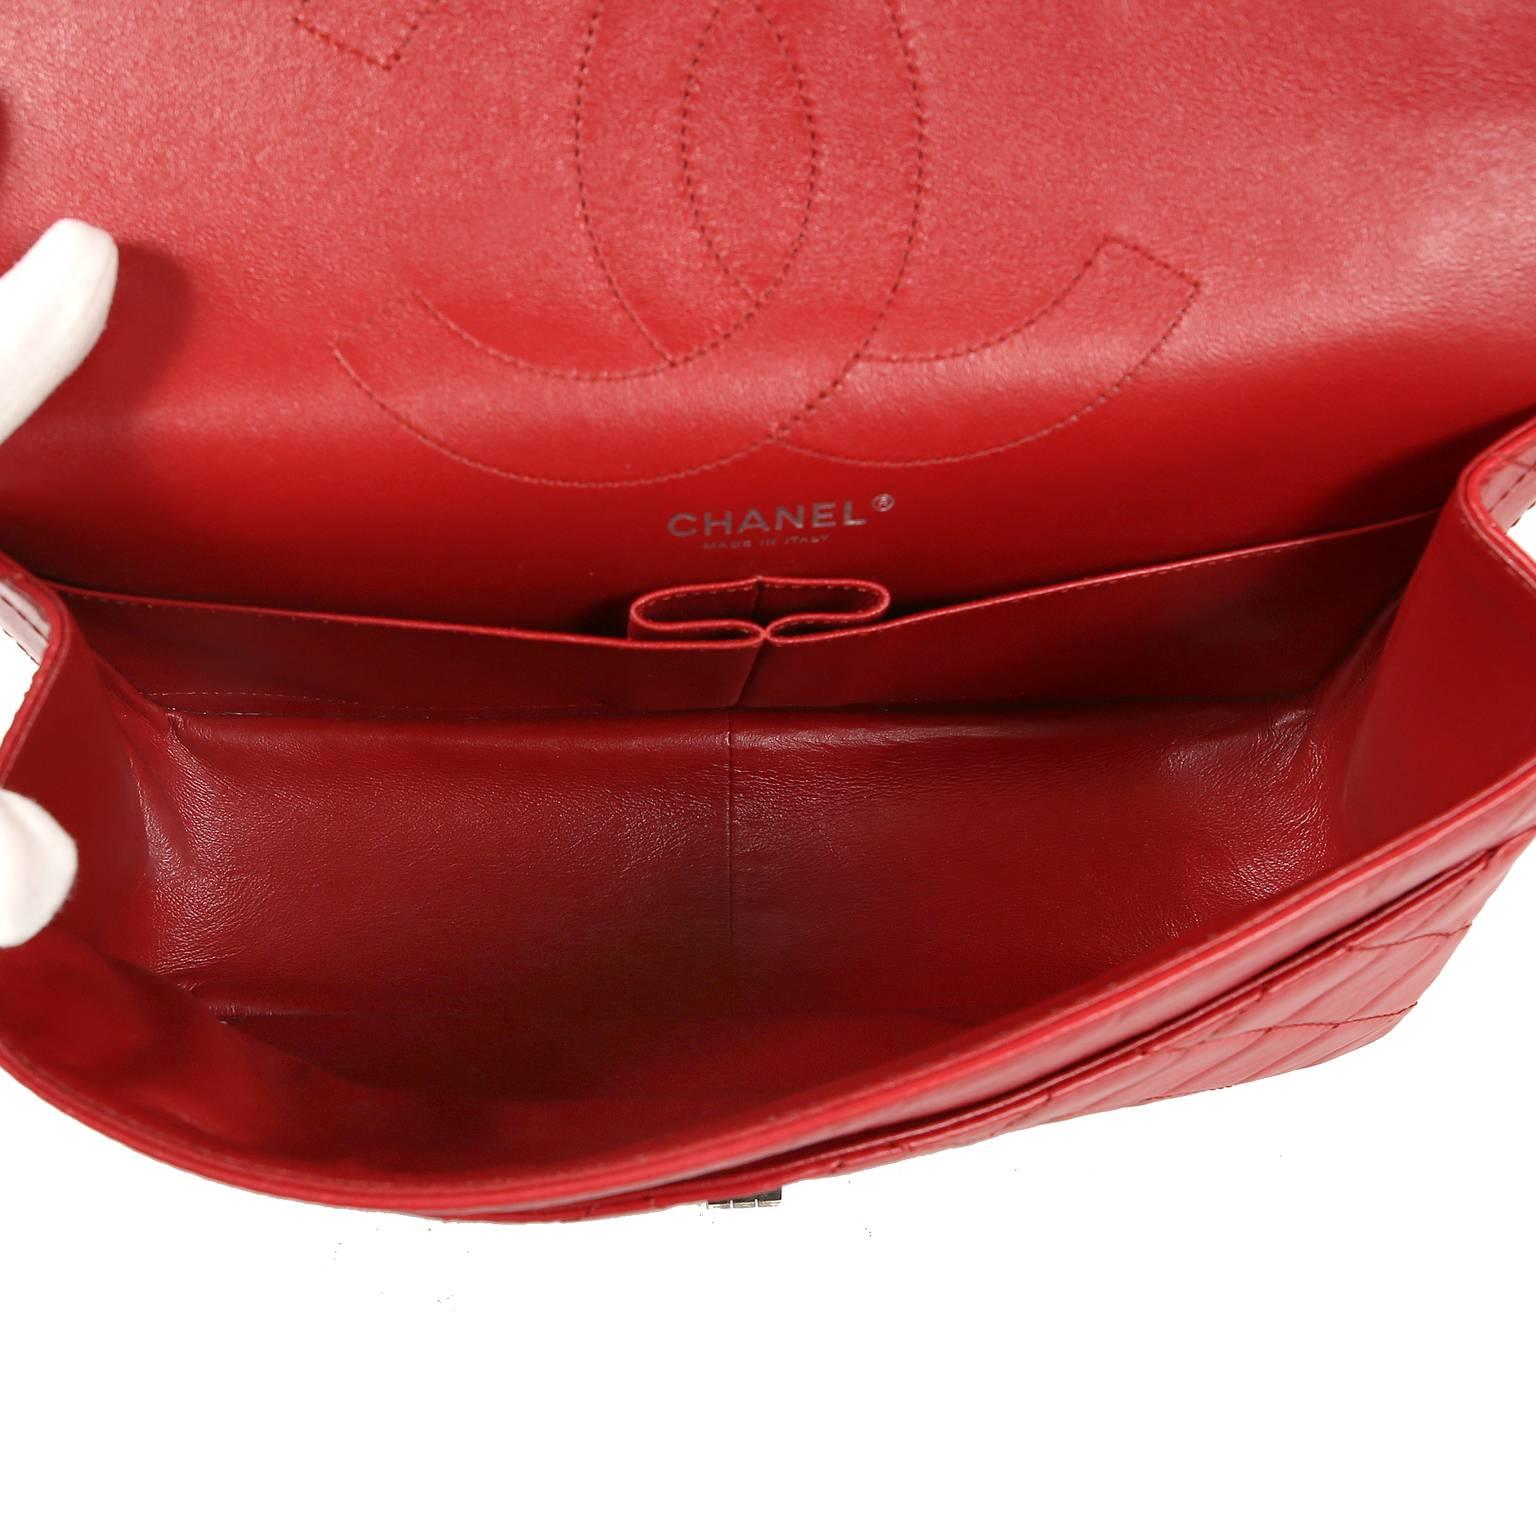 Chanel Red Calfskin 2.55 Reissue Flap Bag- 227 size 1